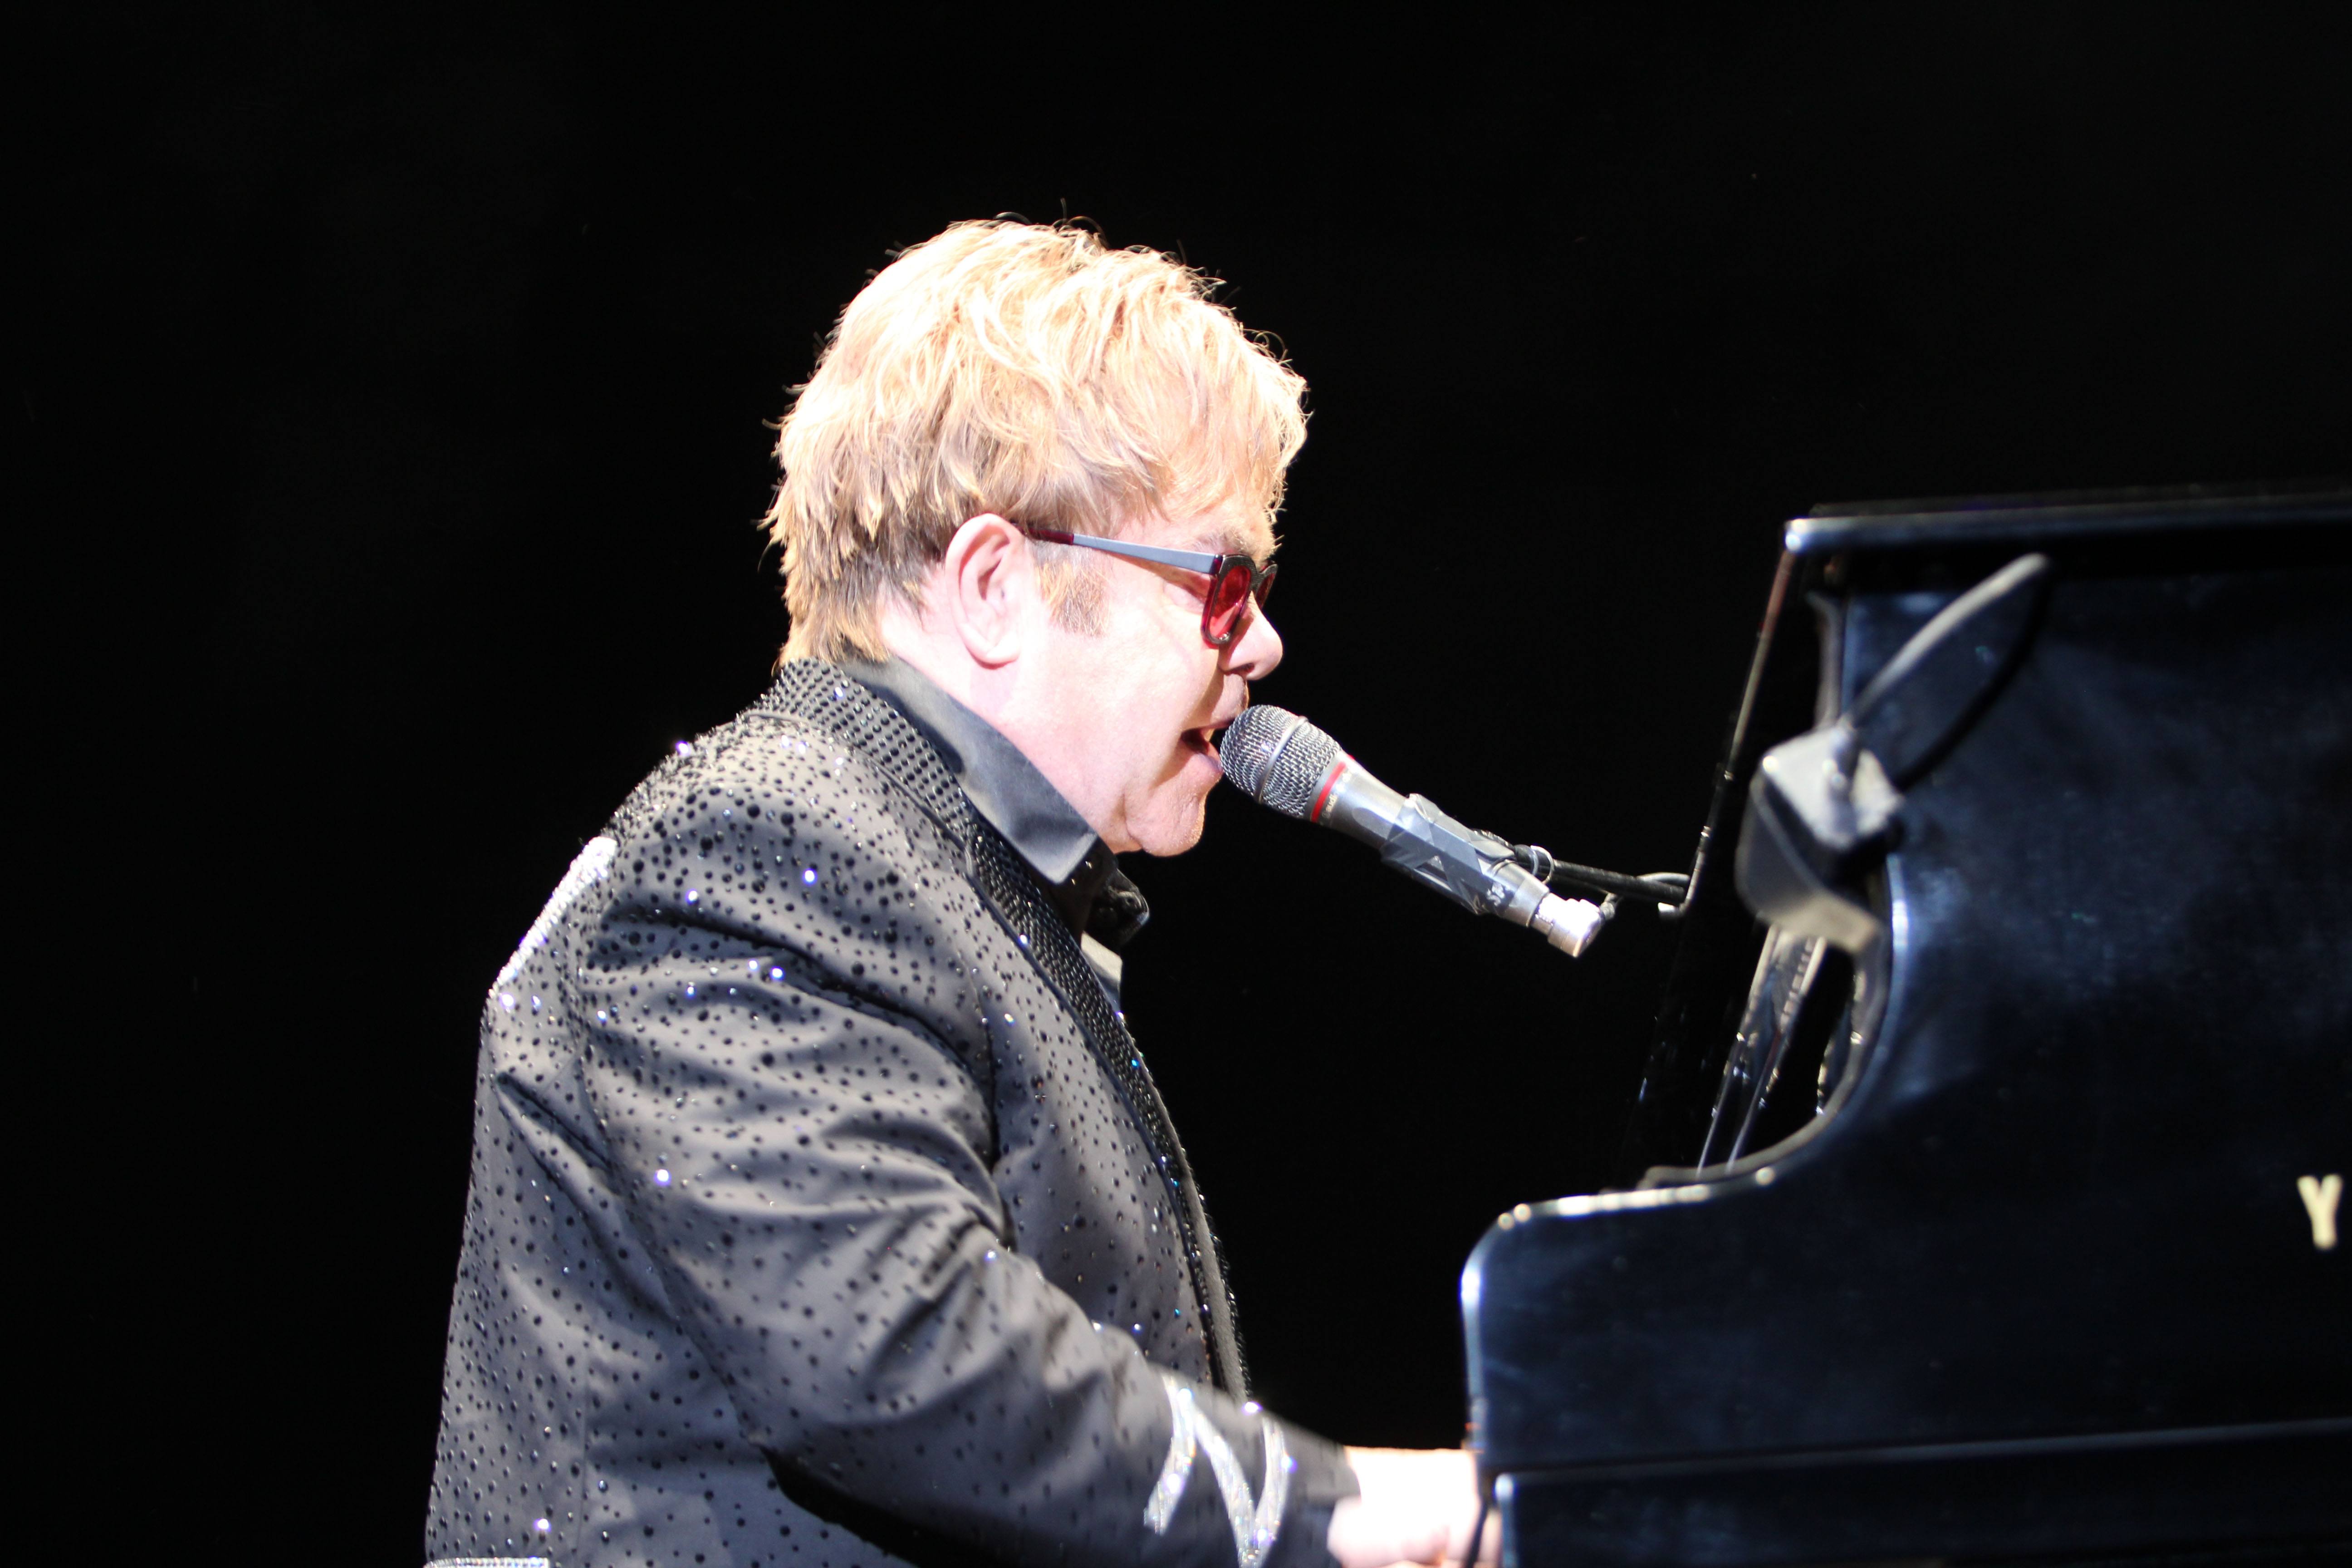 MUSIC LEGEND- Elton John entertained a sold out crowd last night at the Centrium.